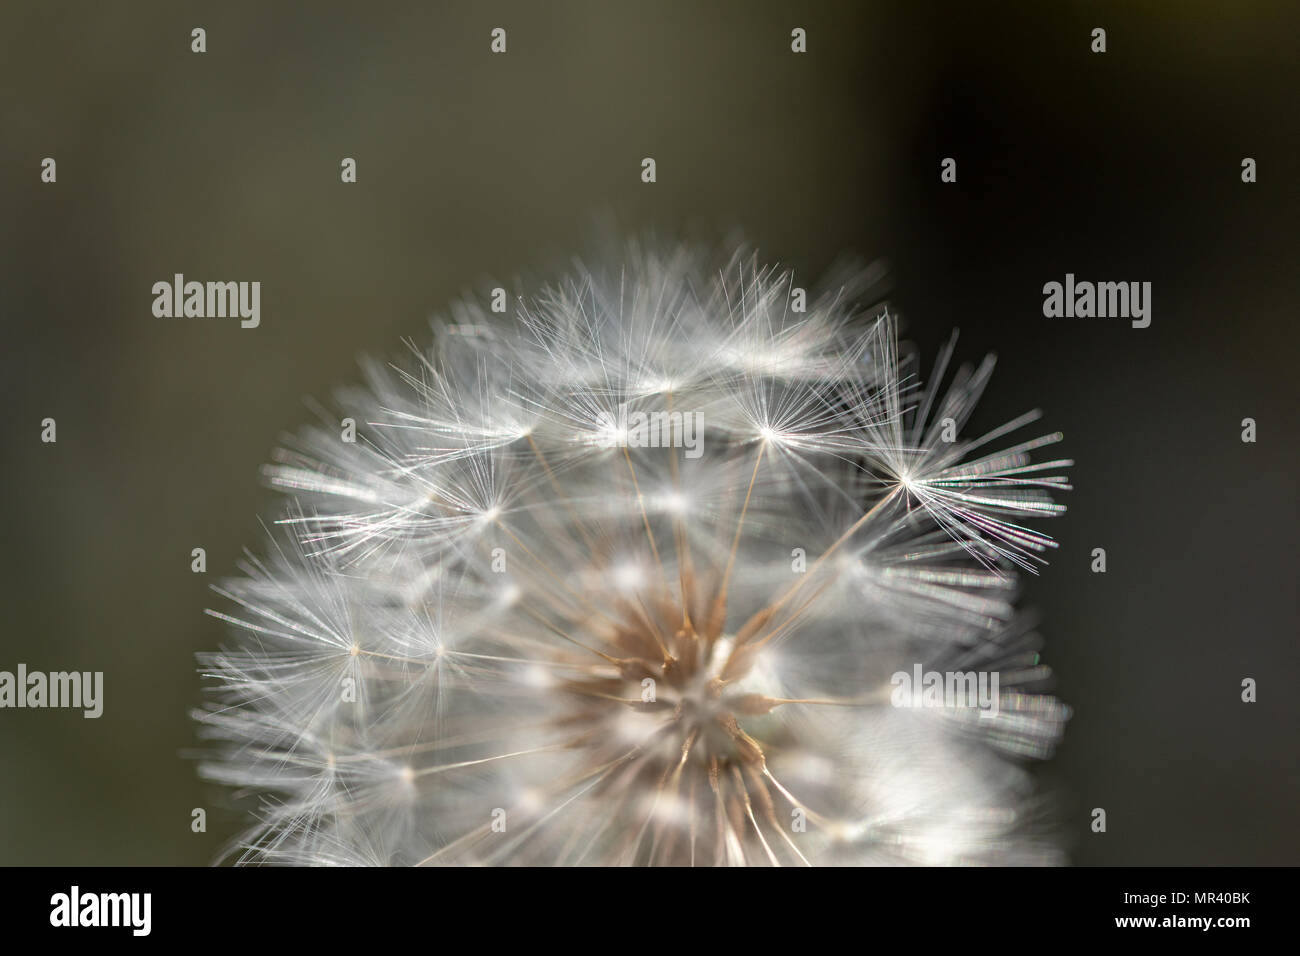 Close-up of dandelion head (Taraxacum) showing seeds and filaments with bokeh background Stock Photo